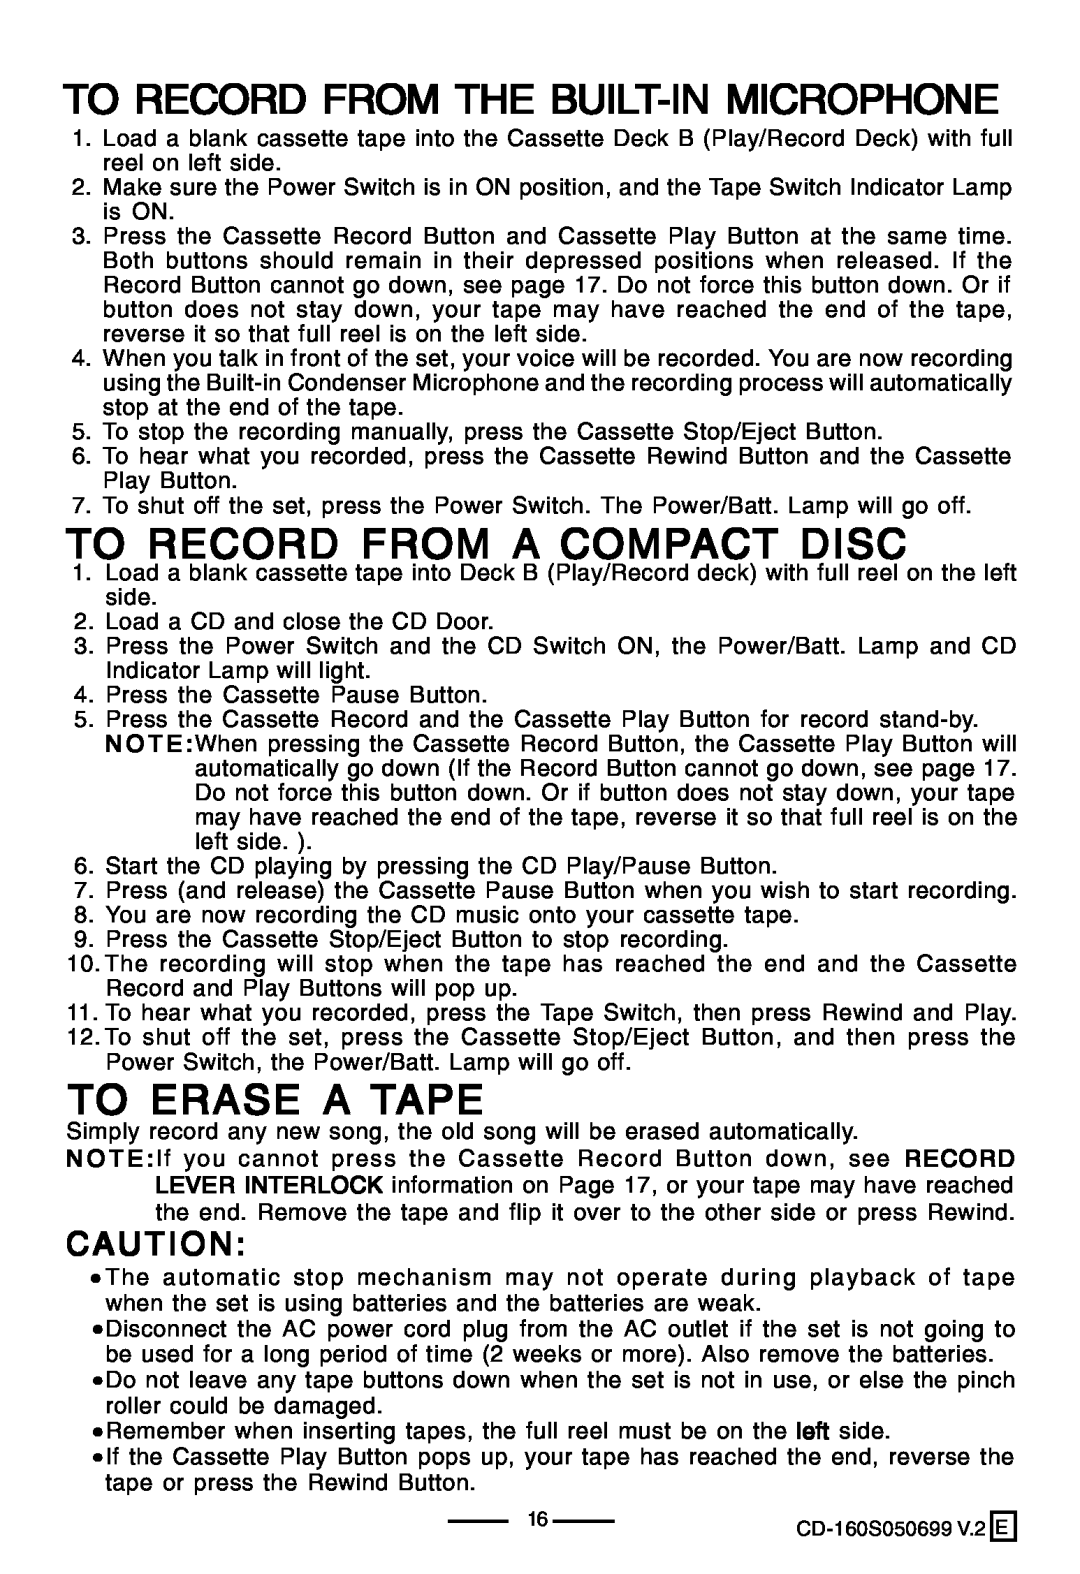 Lenoxx Electronics CD-160 manual To Record From The Built-Inmicrophone, To Record From A Compact Disc, To Erase A Tape 